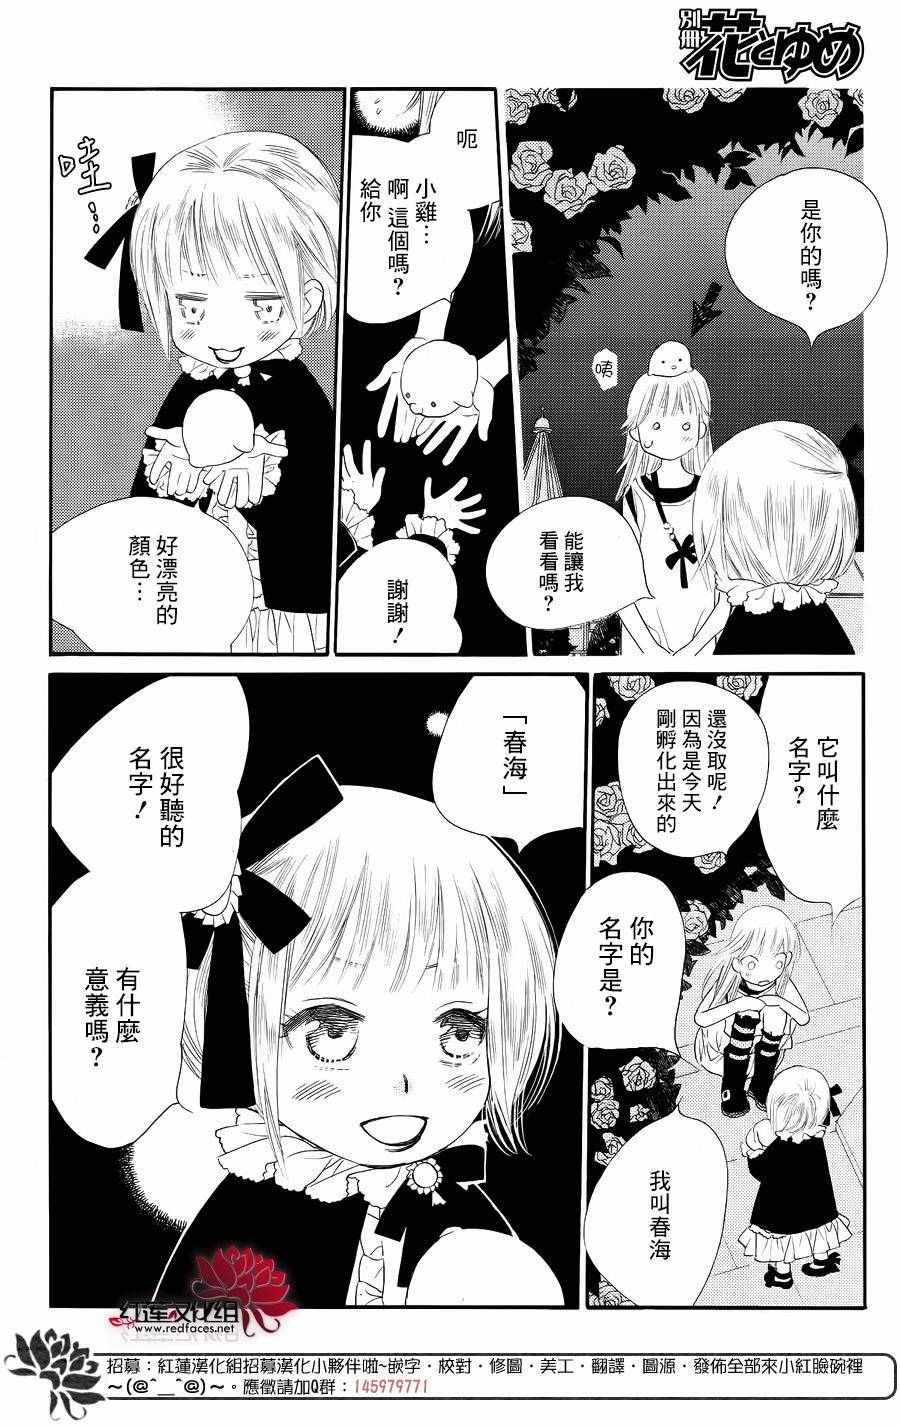 《in JACK out》漫画 前篇